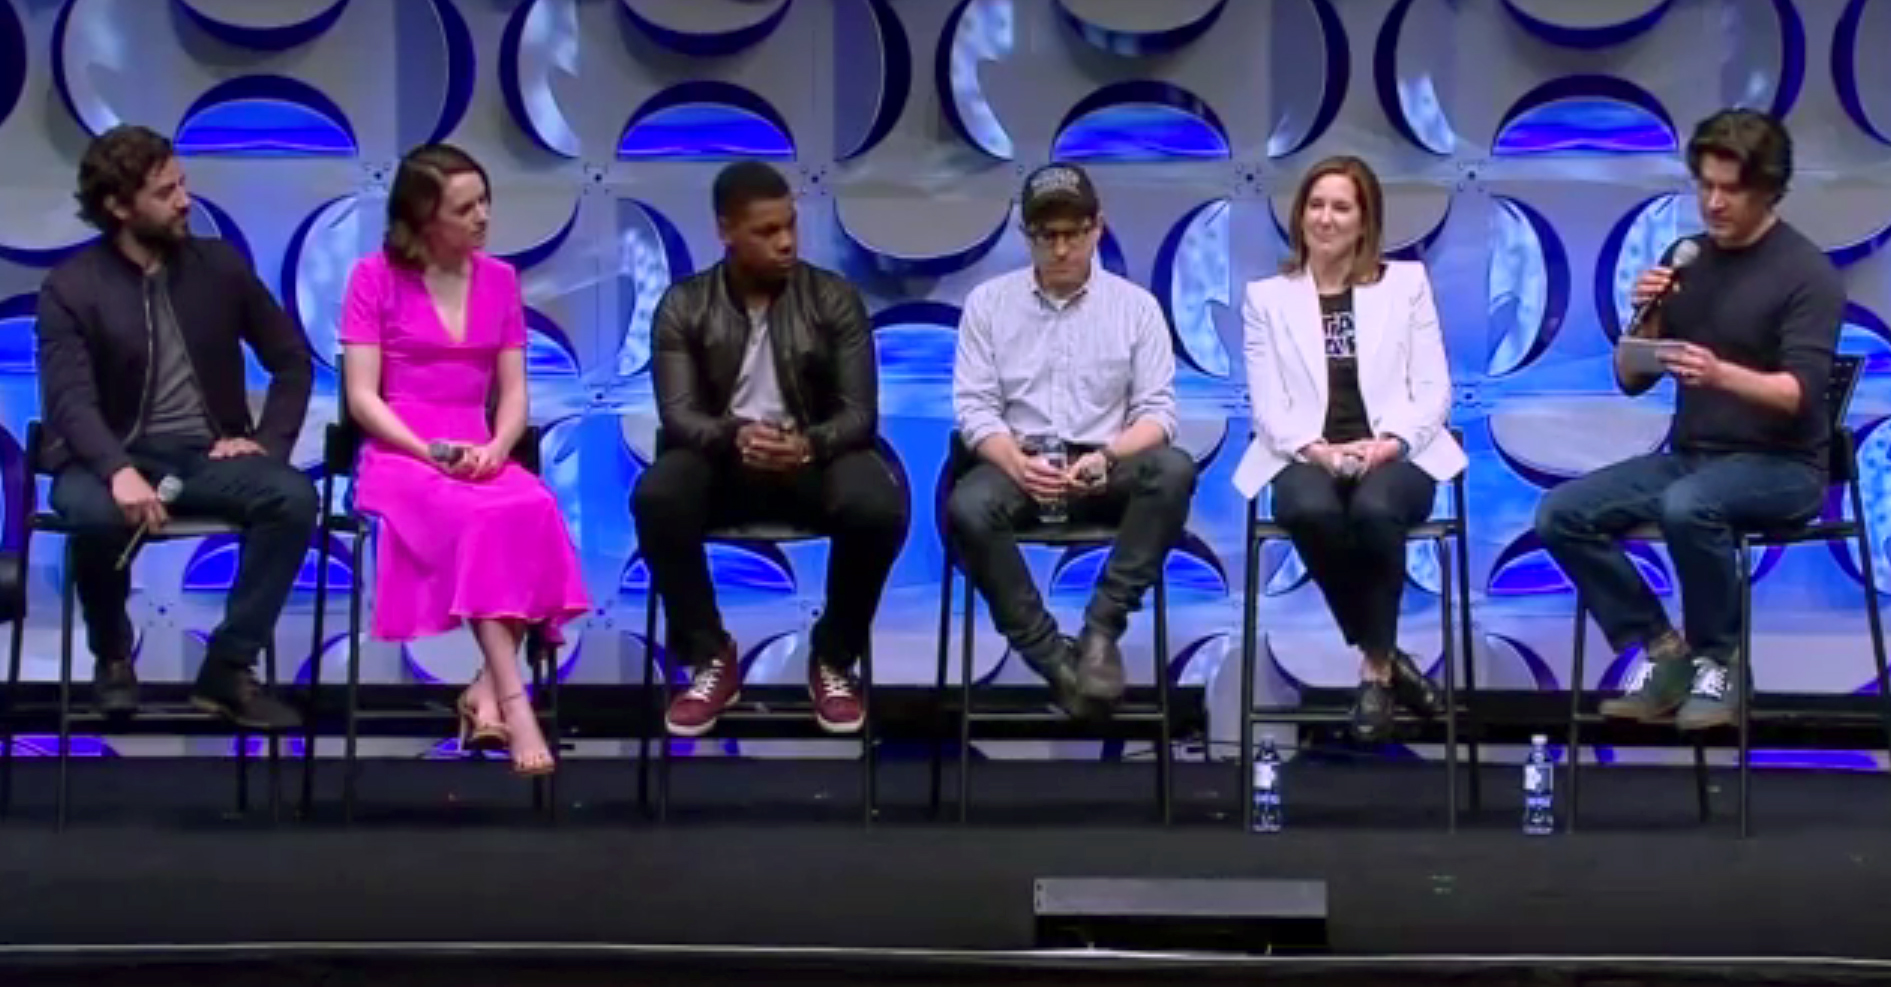 PHOTO: The cast of "Star Wars: The Force Awakens" discuss the new movie live during a panel at Star Wars Celebration Anaheim, April 16, 2015.